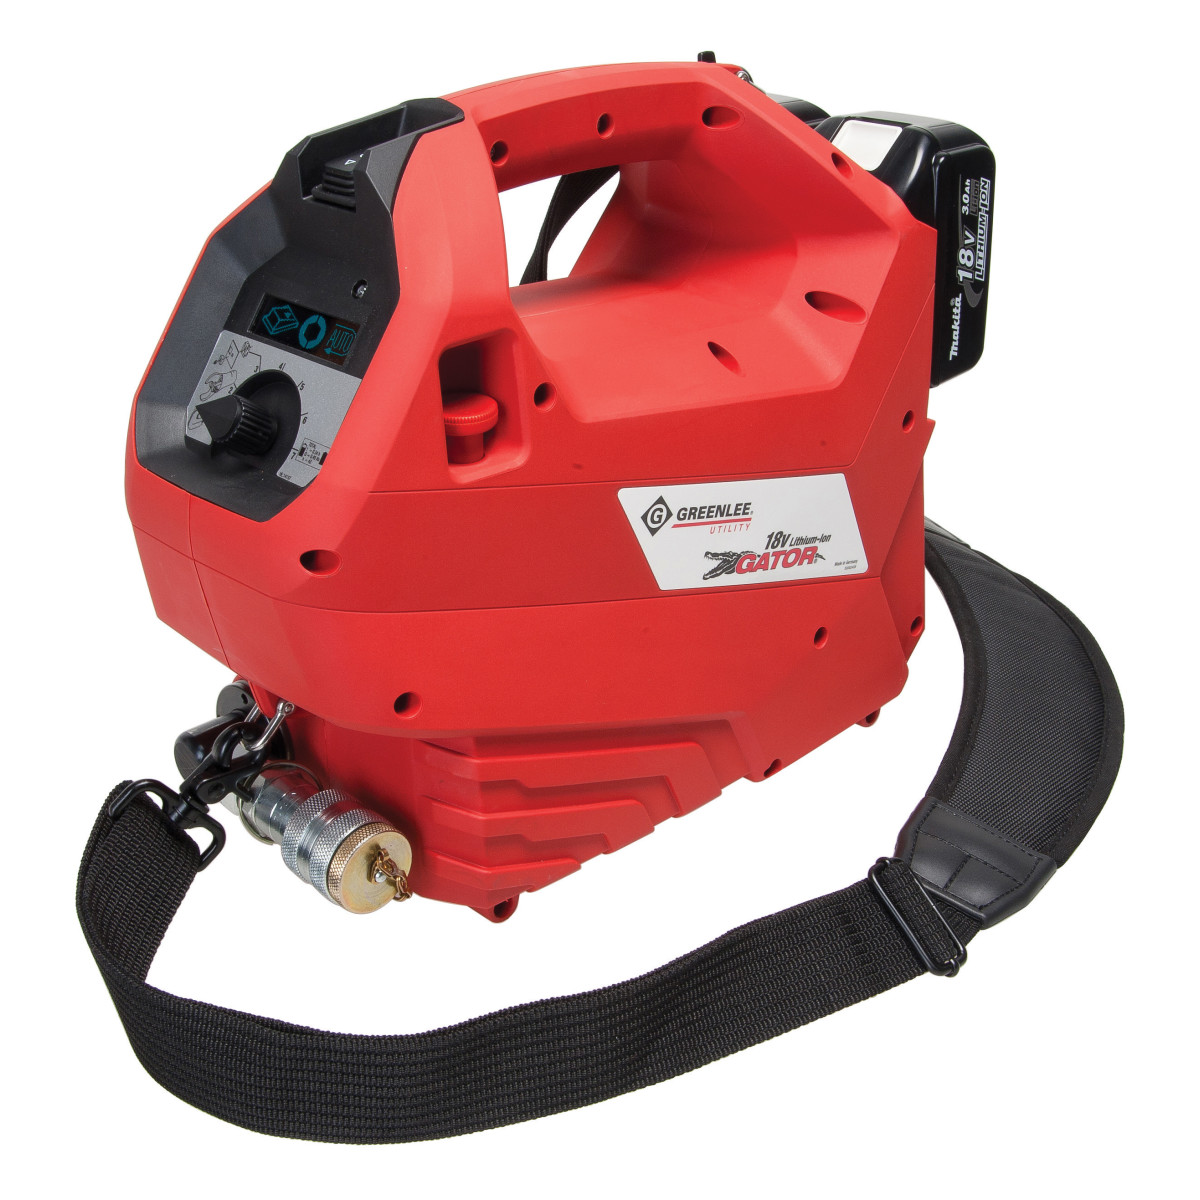 Battery Powered Hydraulic Pump with 12V Charger.  Operates with any 10K PSI single acting remote heads.  3 in 1 pressure specific program settings for crimping cutting and punching.  Dashboard display provides real time monitoring of operation.  On-board and remote rocker switches for pump activation.